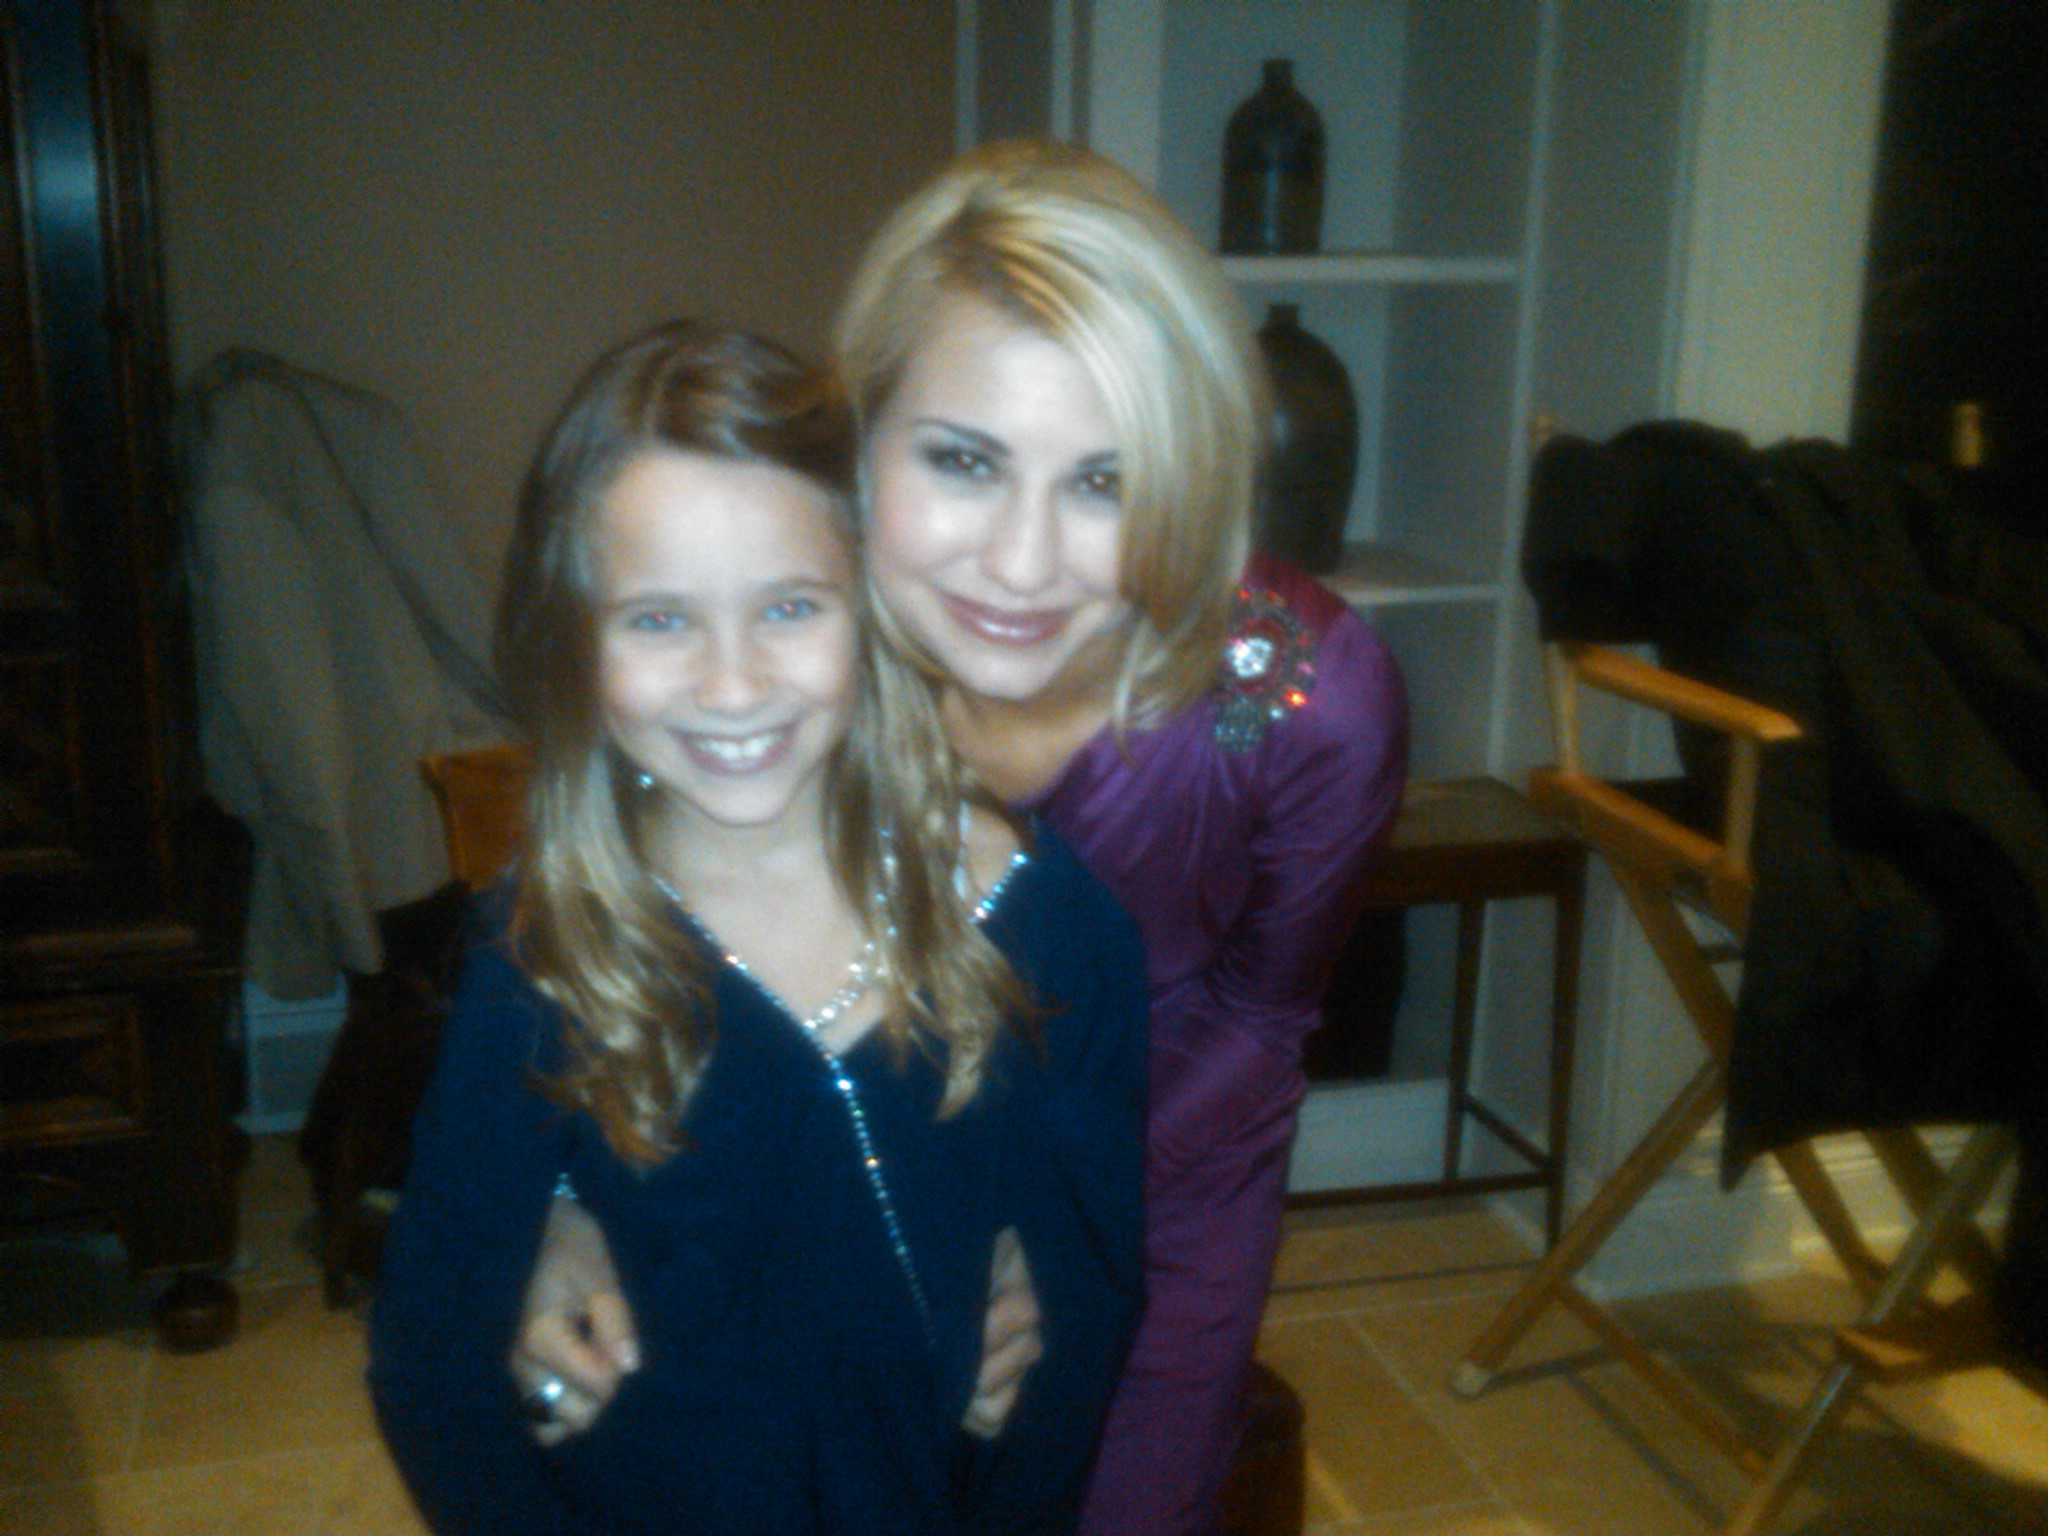 Sammi with Chelsea Kane on the set of Lovestruck: The Musical